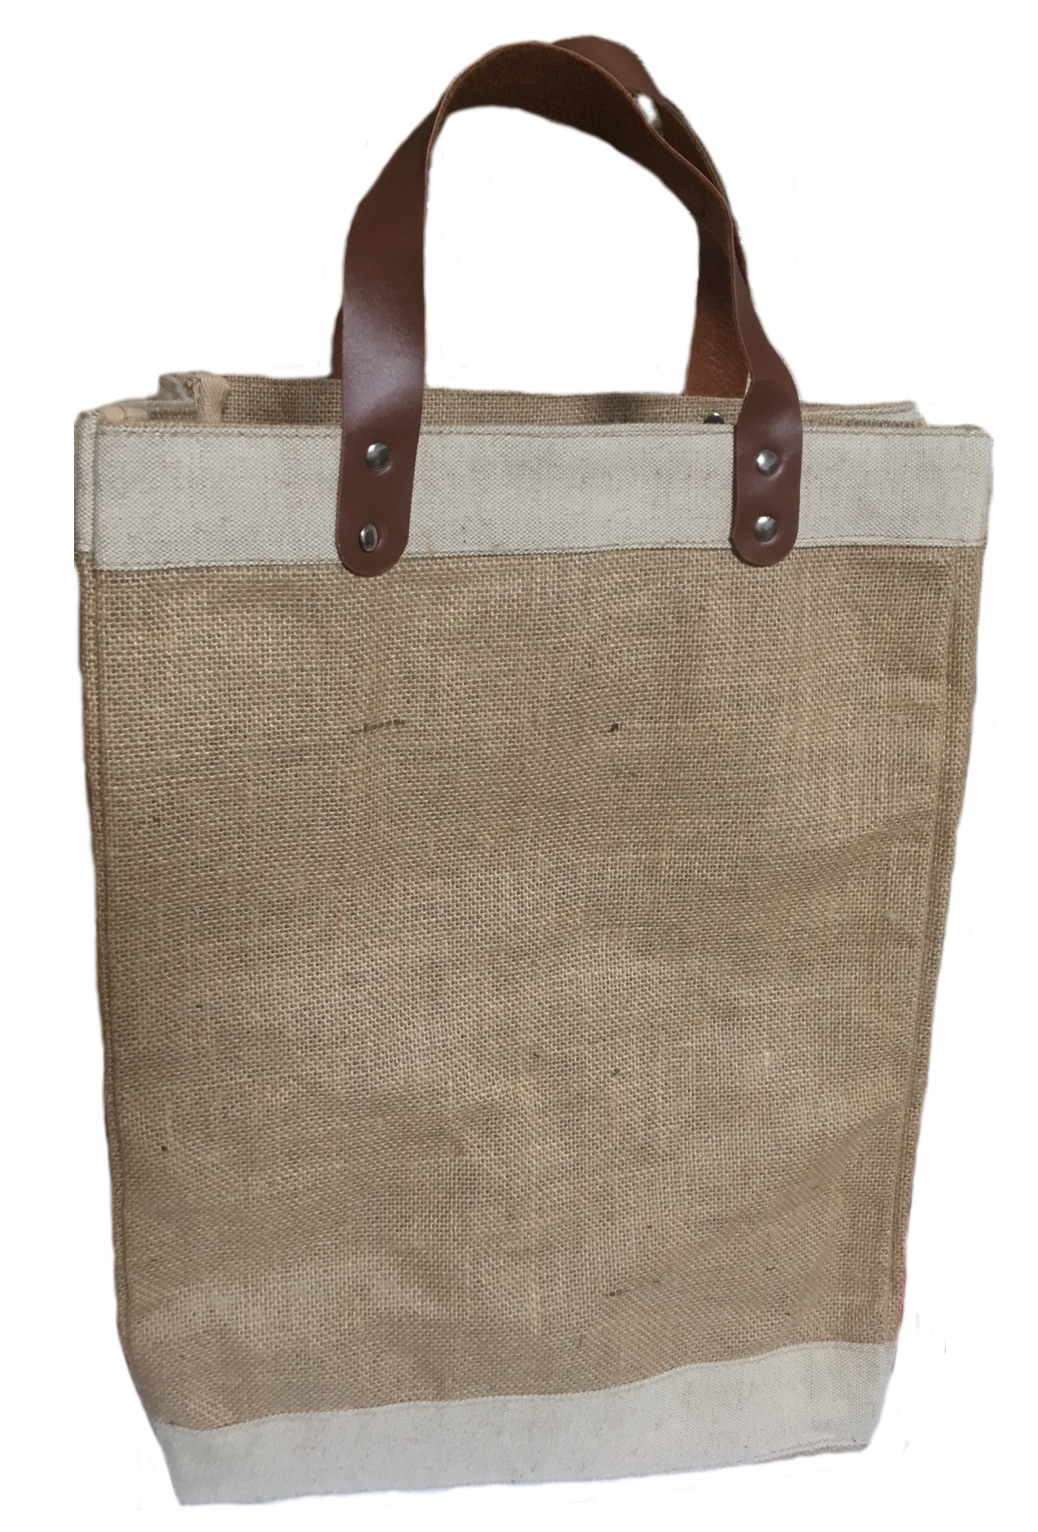 Jute Tote Bag With Faux Leather Handles 13"W x 18"H x 7.5"G - Click Image to Close